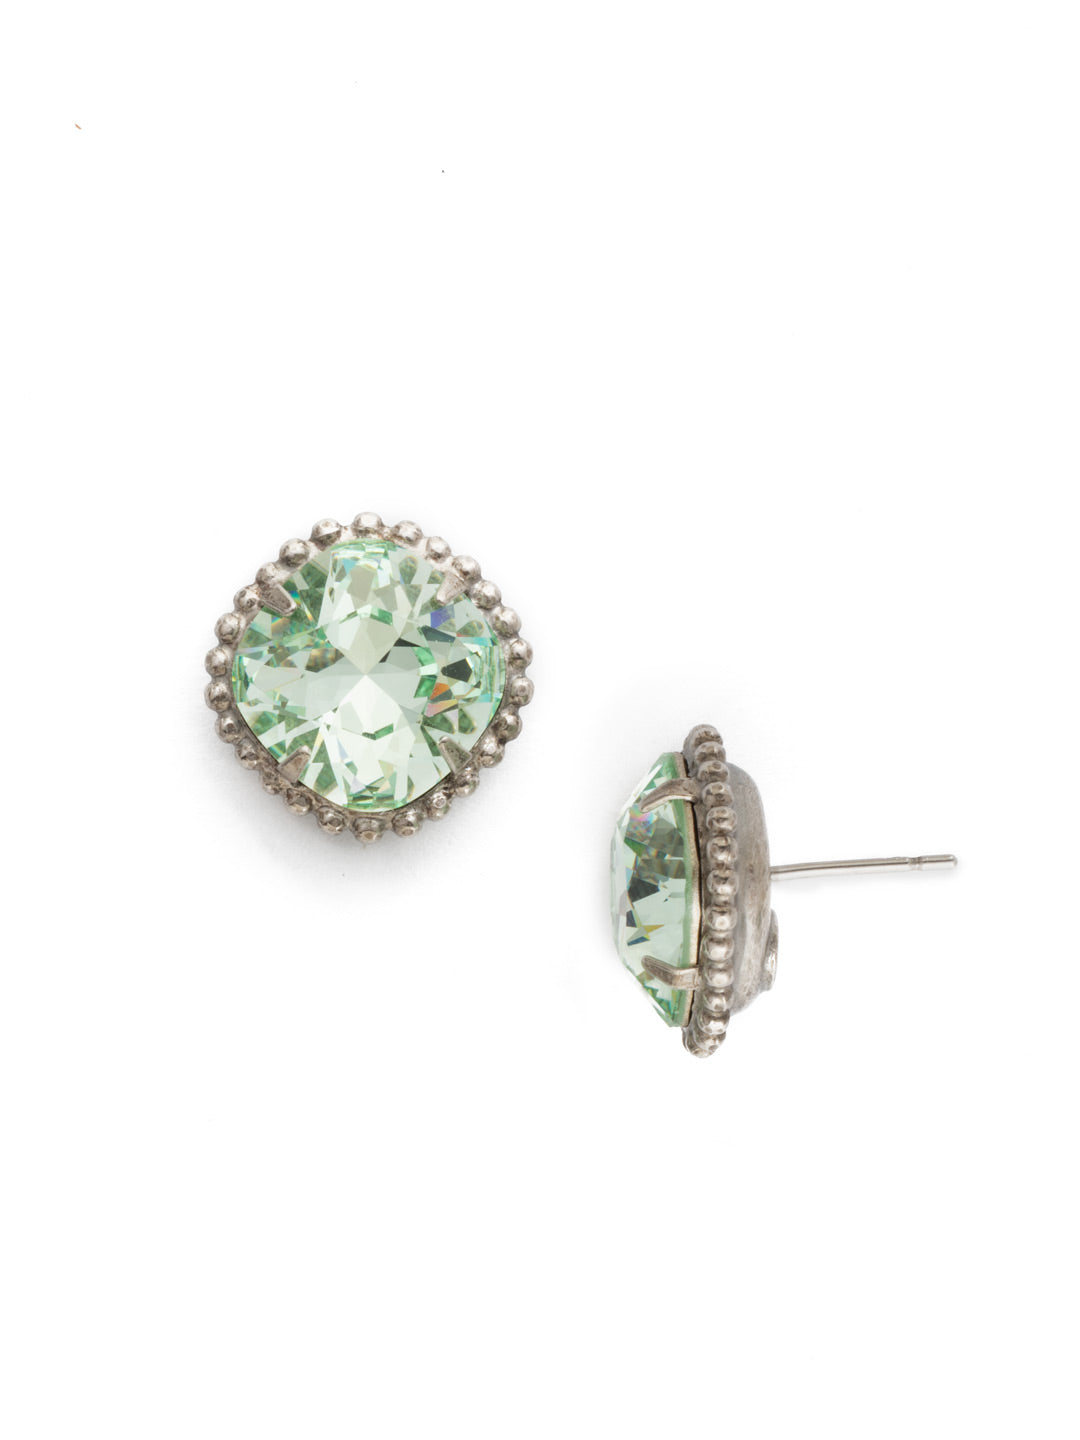 Cushion-Cut Solitaire Stud Earrings - EBX10ASMIN - All around allure; the Cushion-Cut Solitaire Stud Earring features a rounded-edge, cushion cut stone that is encircled by a vintage inspired decorative, edged border. A post backing ensures comfortable, everyday wear. From Sorrelli's Mint collection in our Antique Silver-tone finish.